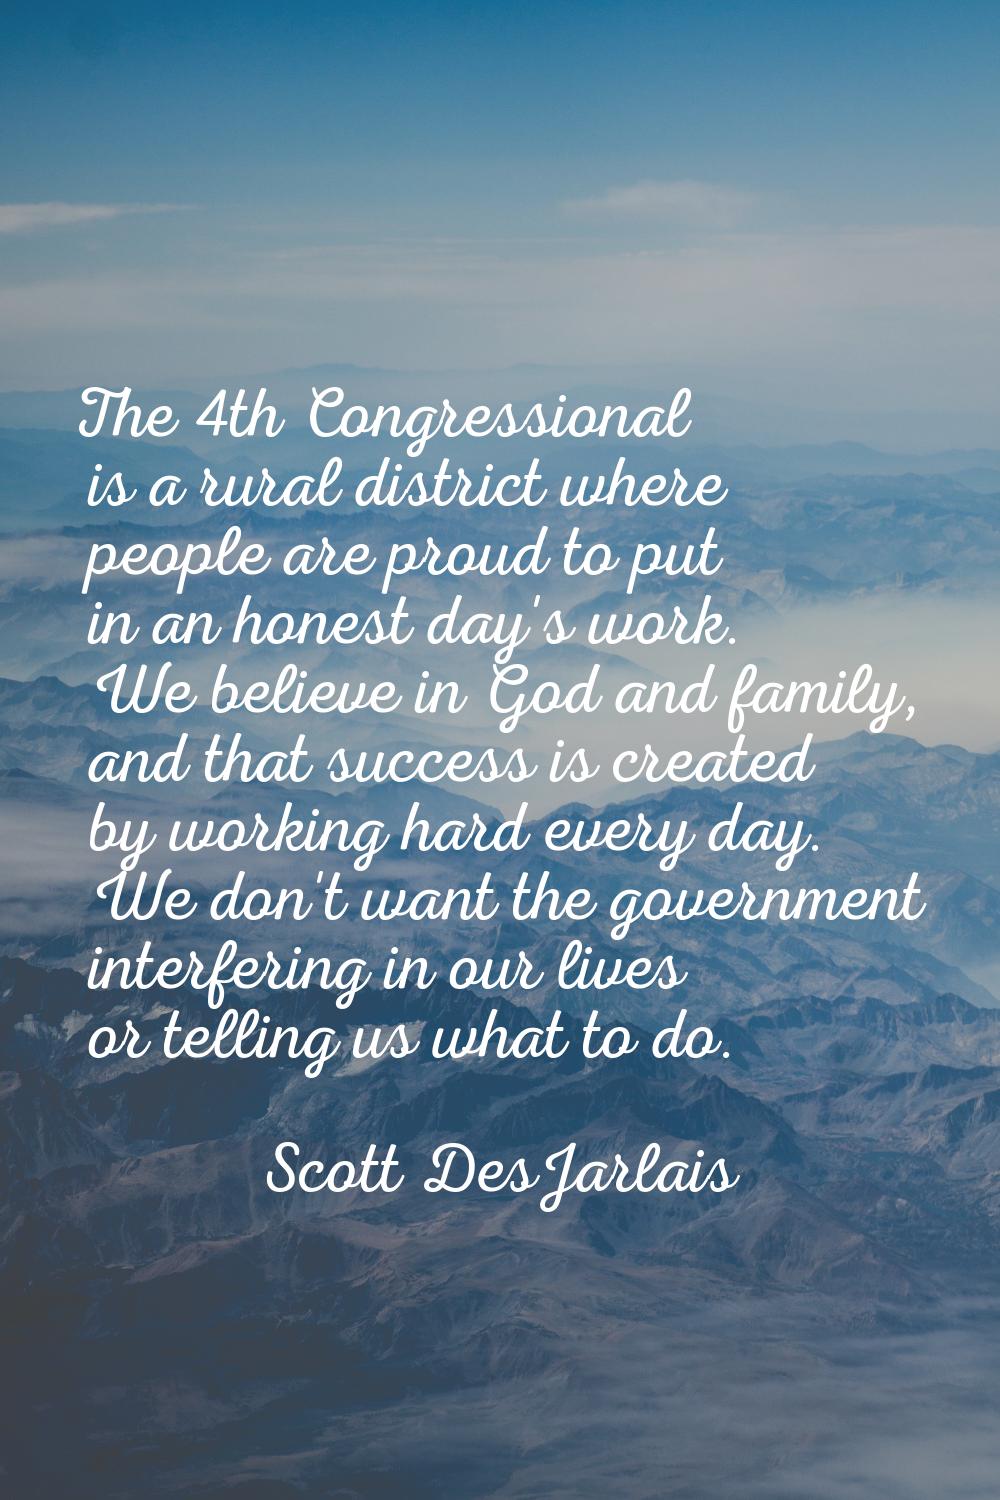 The 4th Congressional is a rural district where people are proud to put in an honest day's work. We